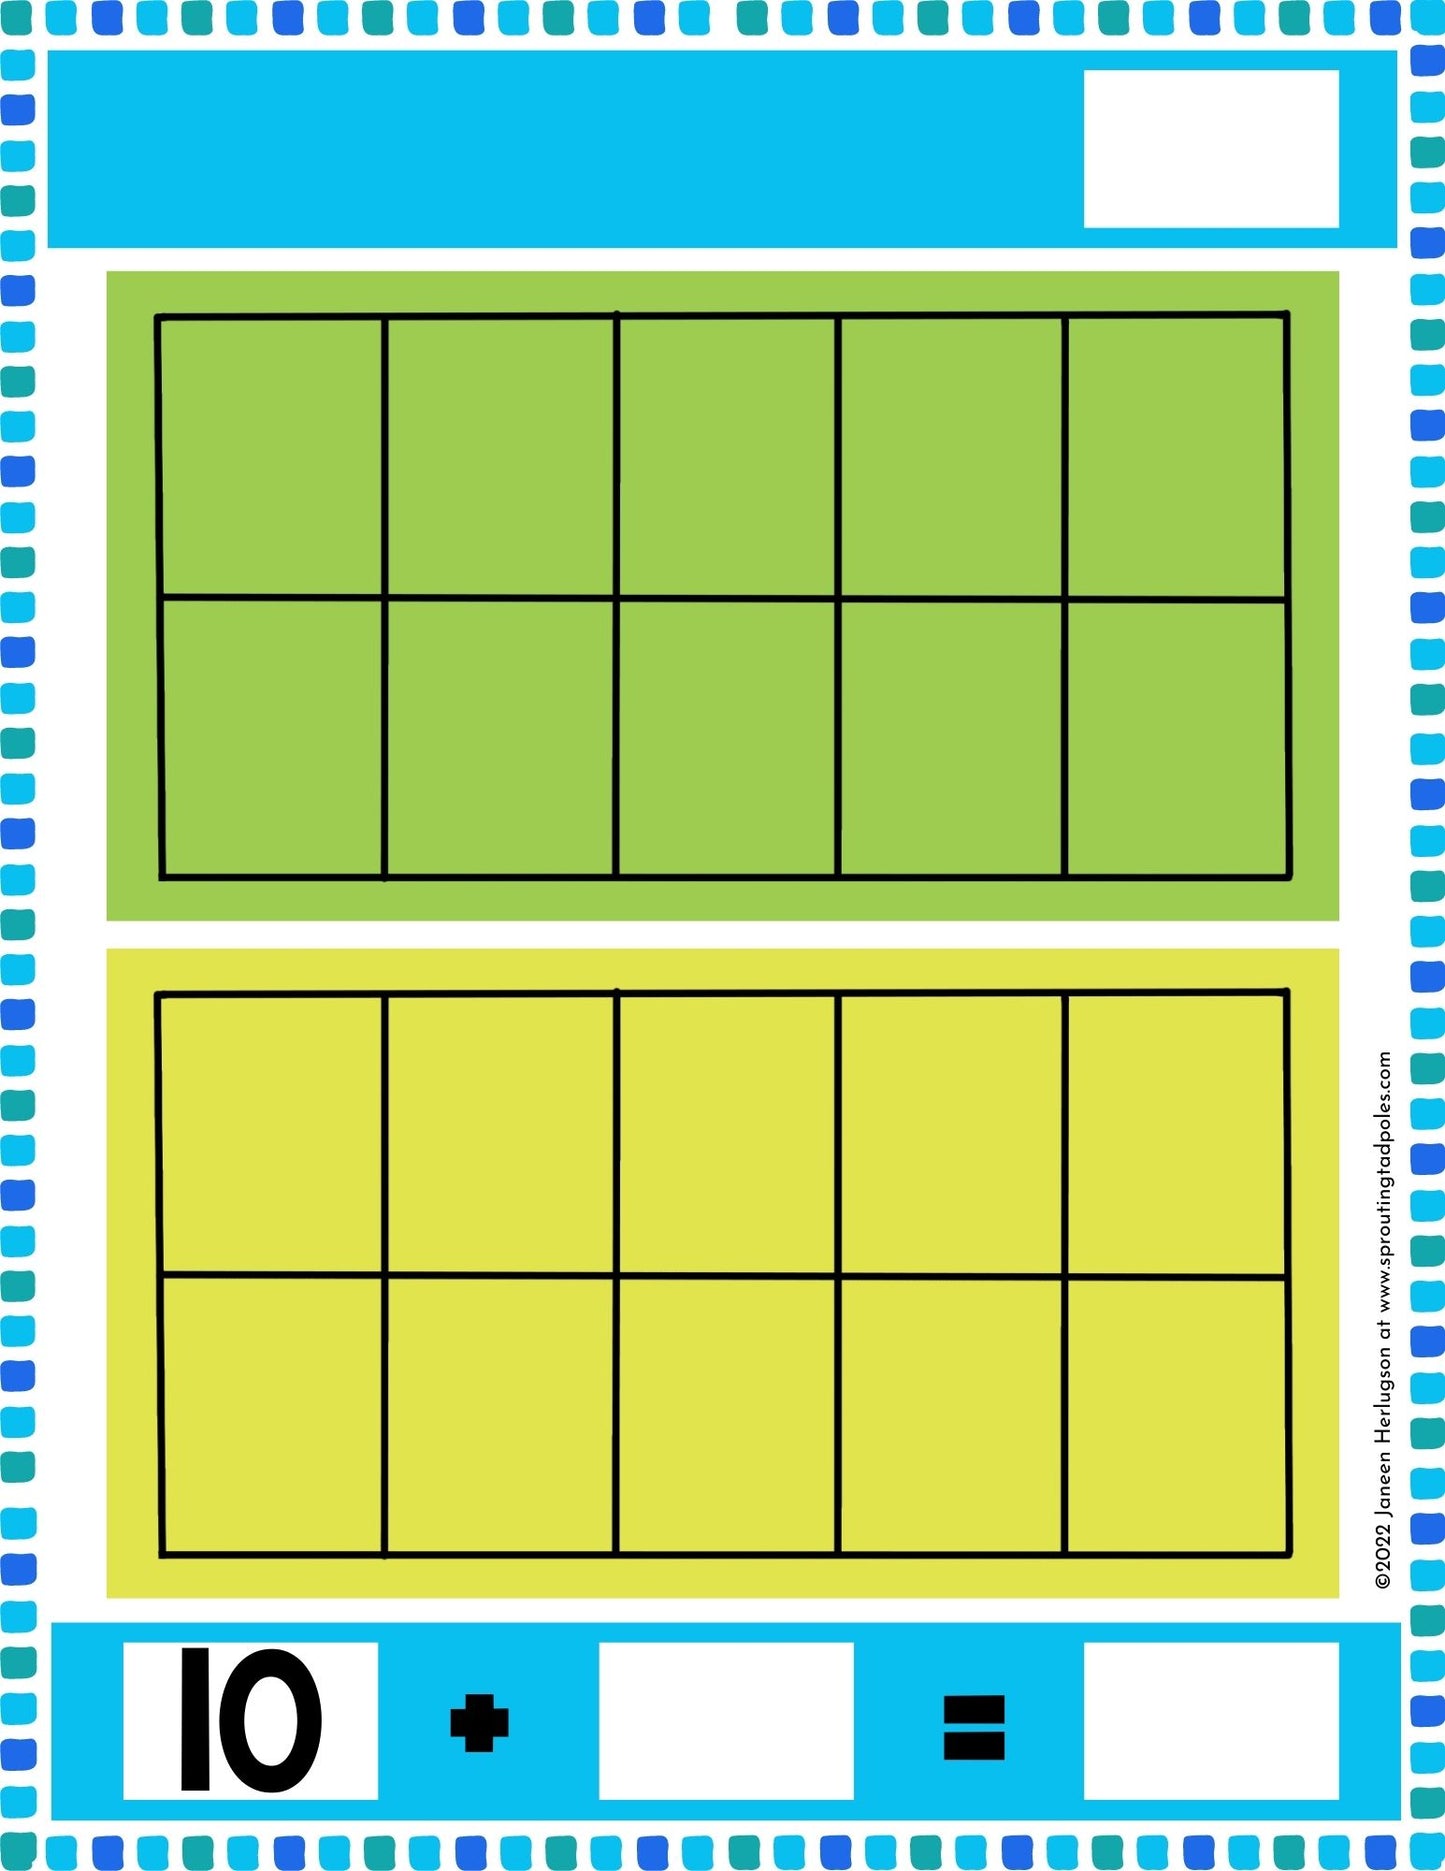 Ten Frame Counting Math Game